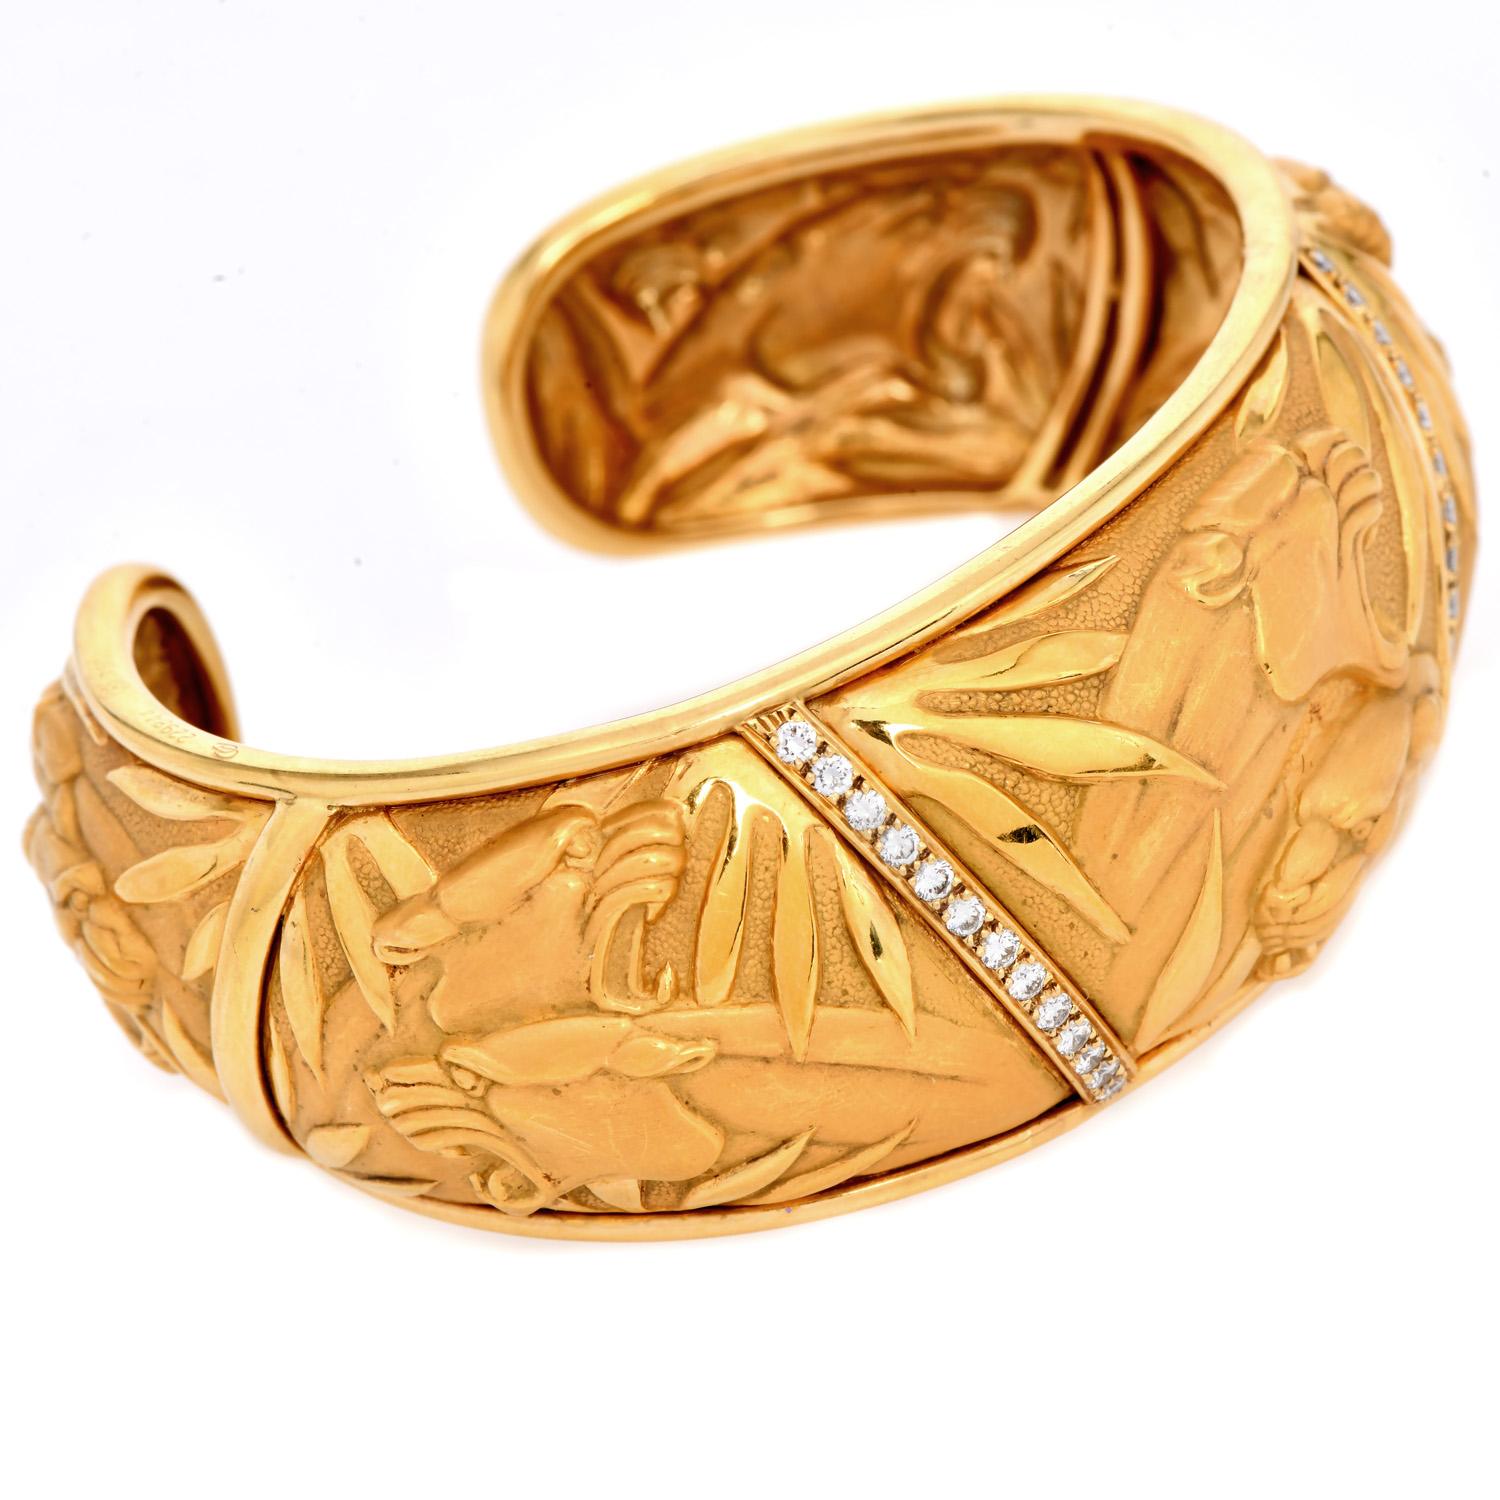 From Late 20th Century Exquisite Carrera Y Carrera Bracelet.

It is finely crafted in 18K Yellow Gold in Spain with a matte satin finish. From the 